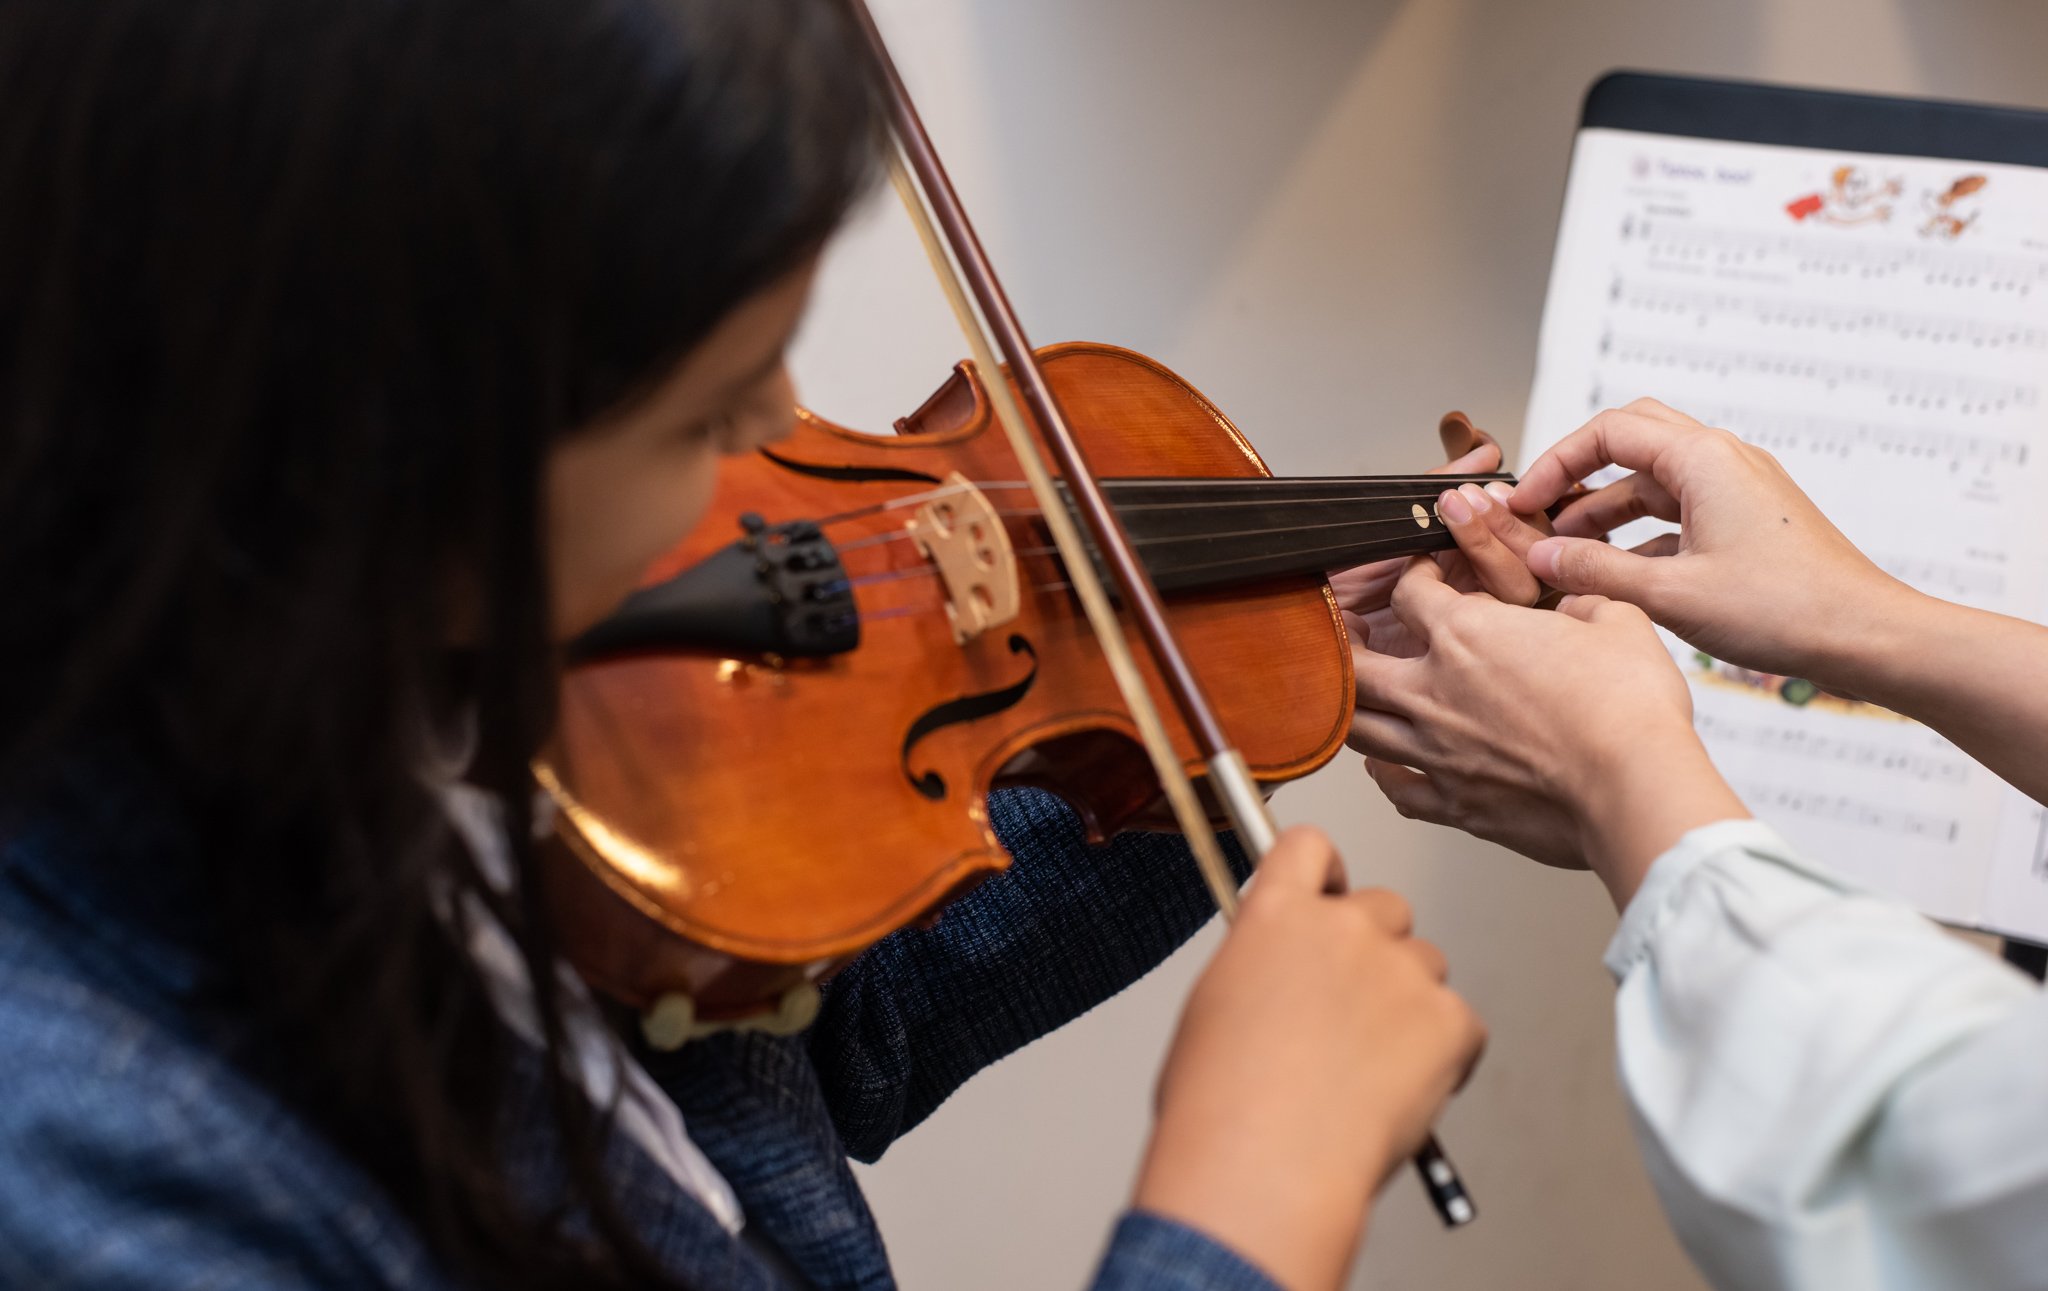 A student is holding a violin and an off-screen teacher is correcting her finger placement on the strings.